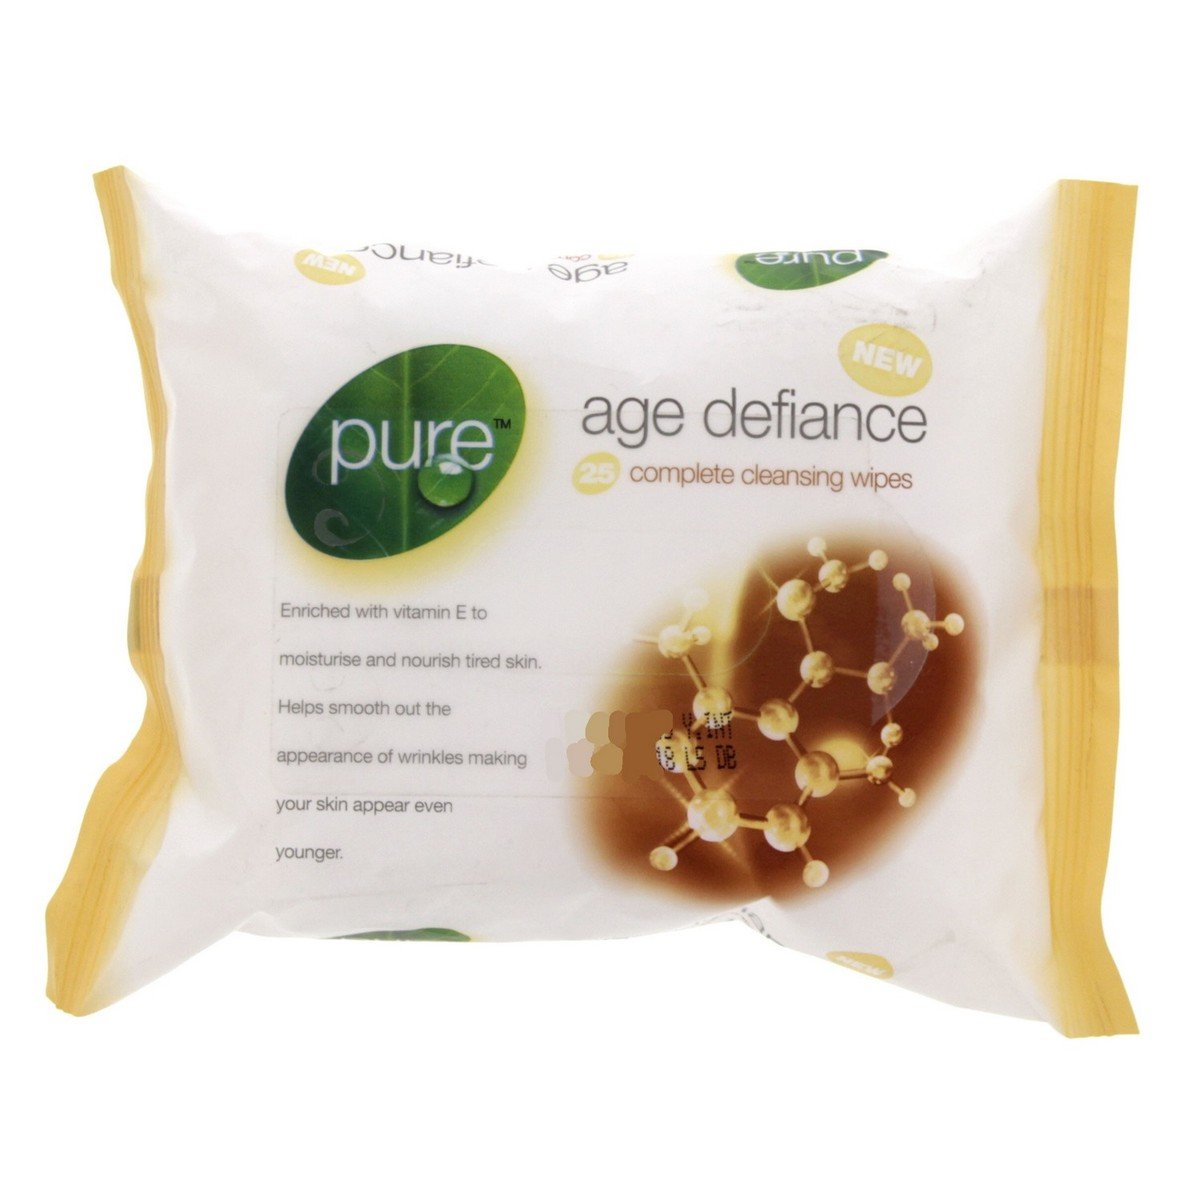 Pure Age Defiance Complete Cleansing Wipes 25 pcs